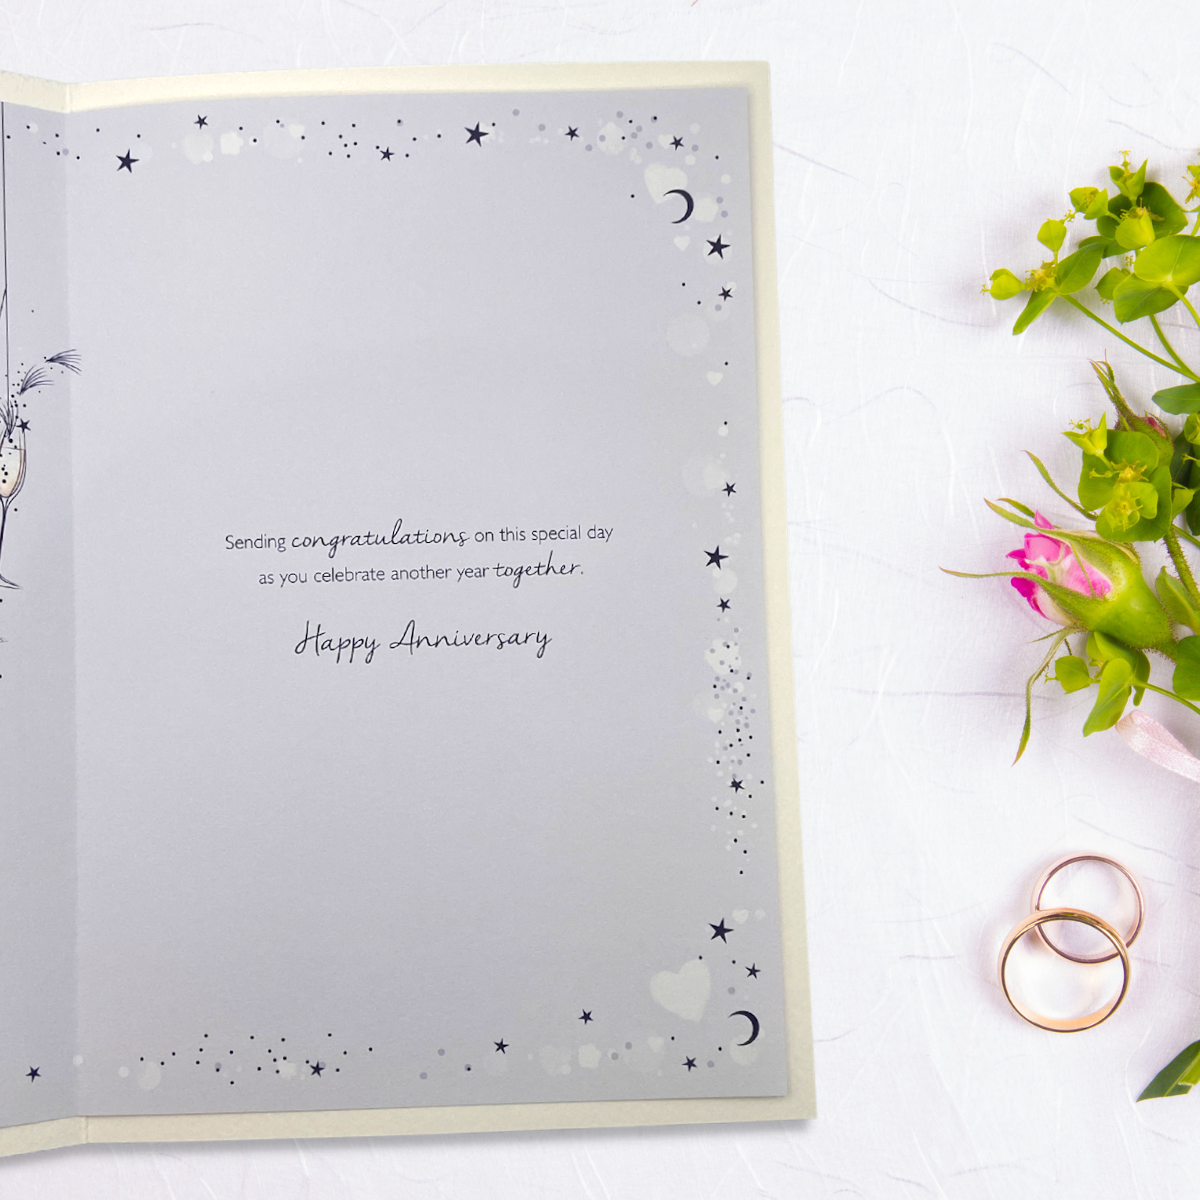 Brother & Sister-In-Law Wedding Anniversary Card - Mayfair